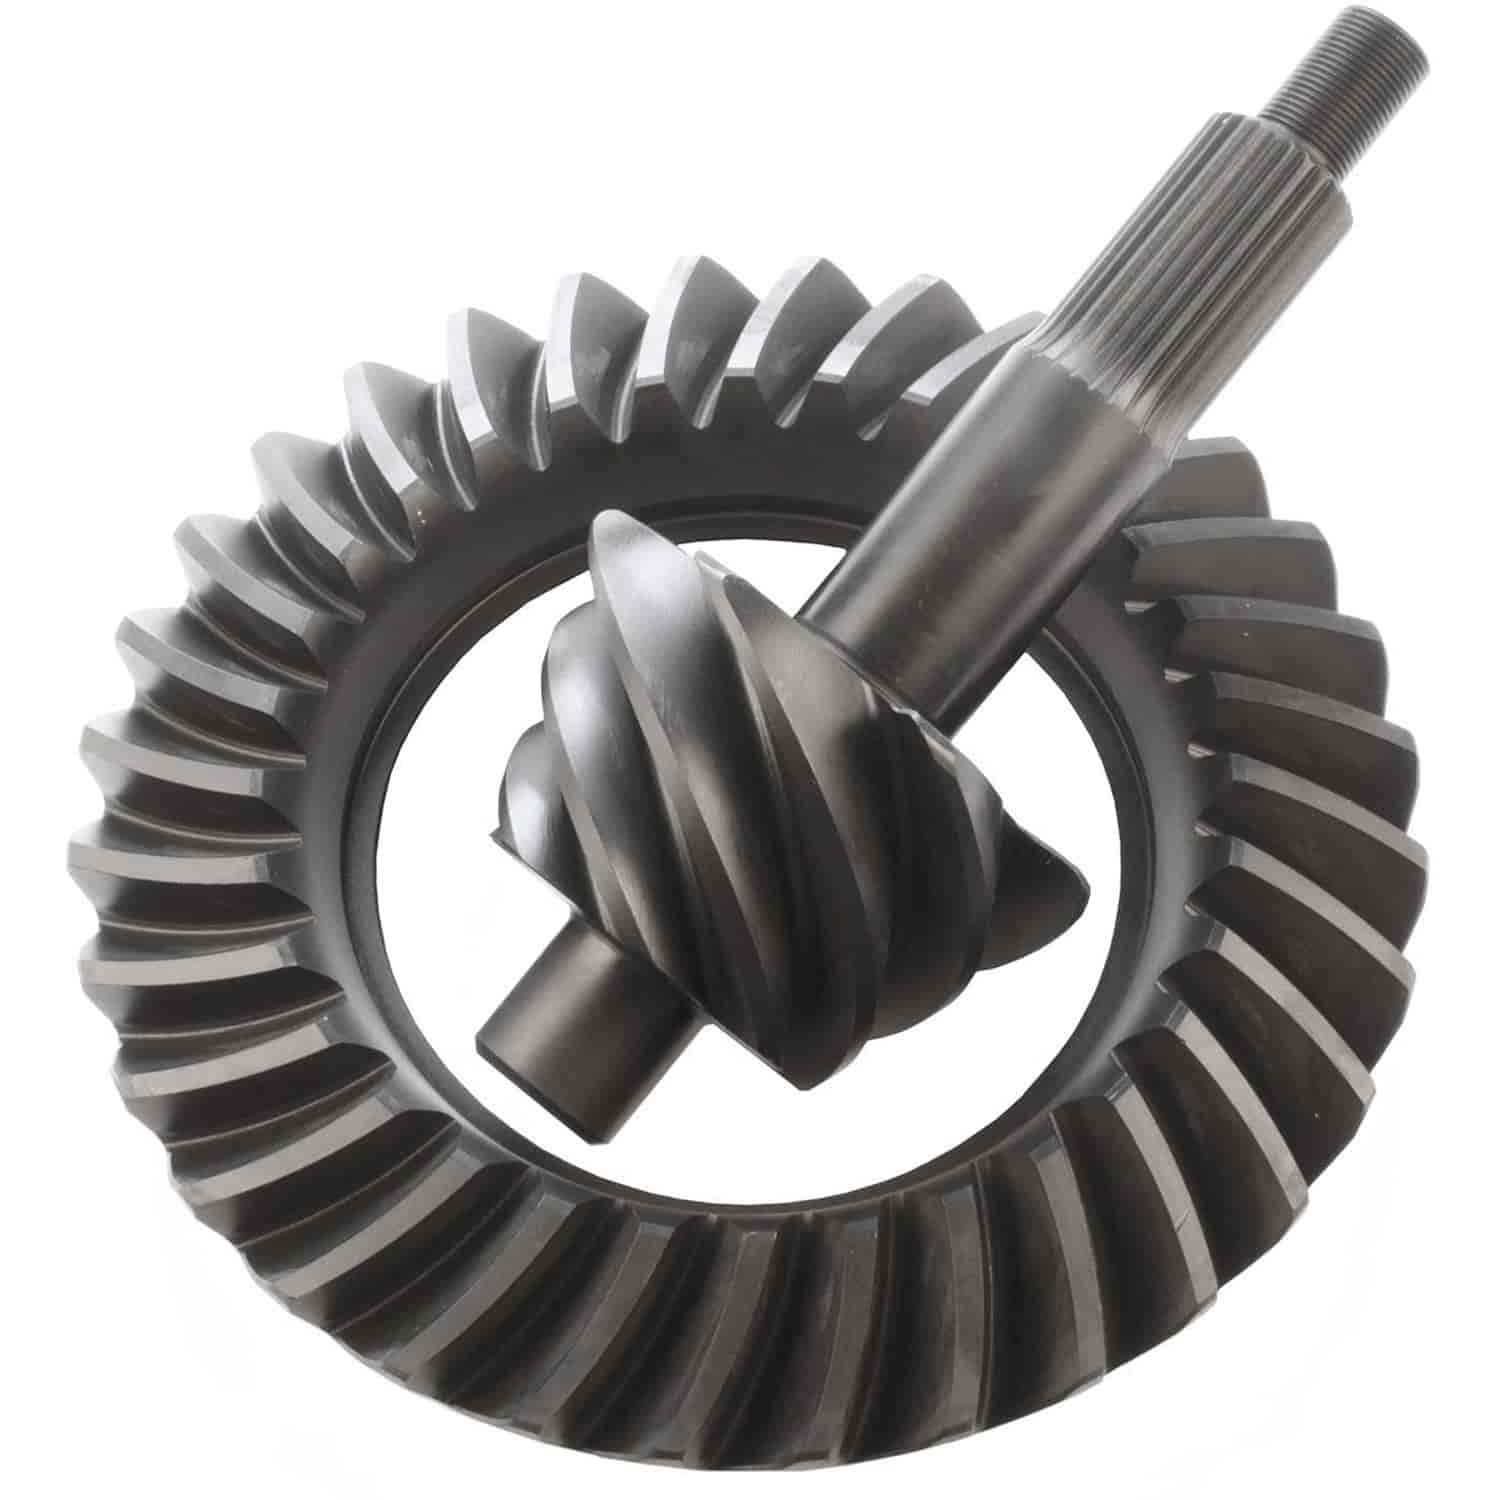 Excel Ring & Pinion Gear Set Ford 9" Ratio: 4.56